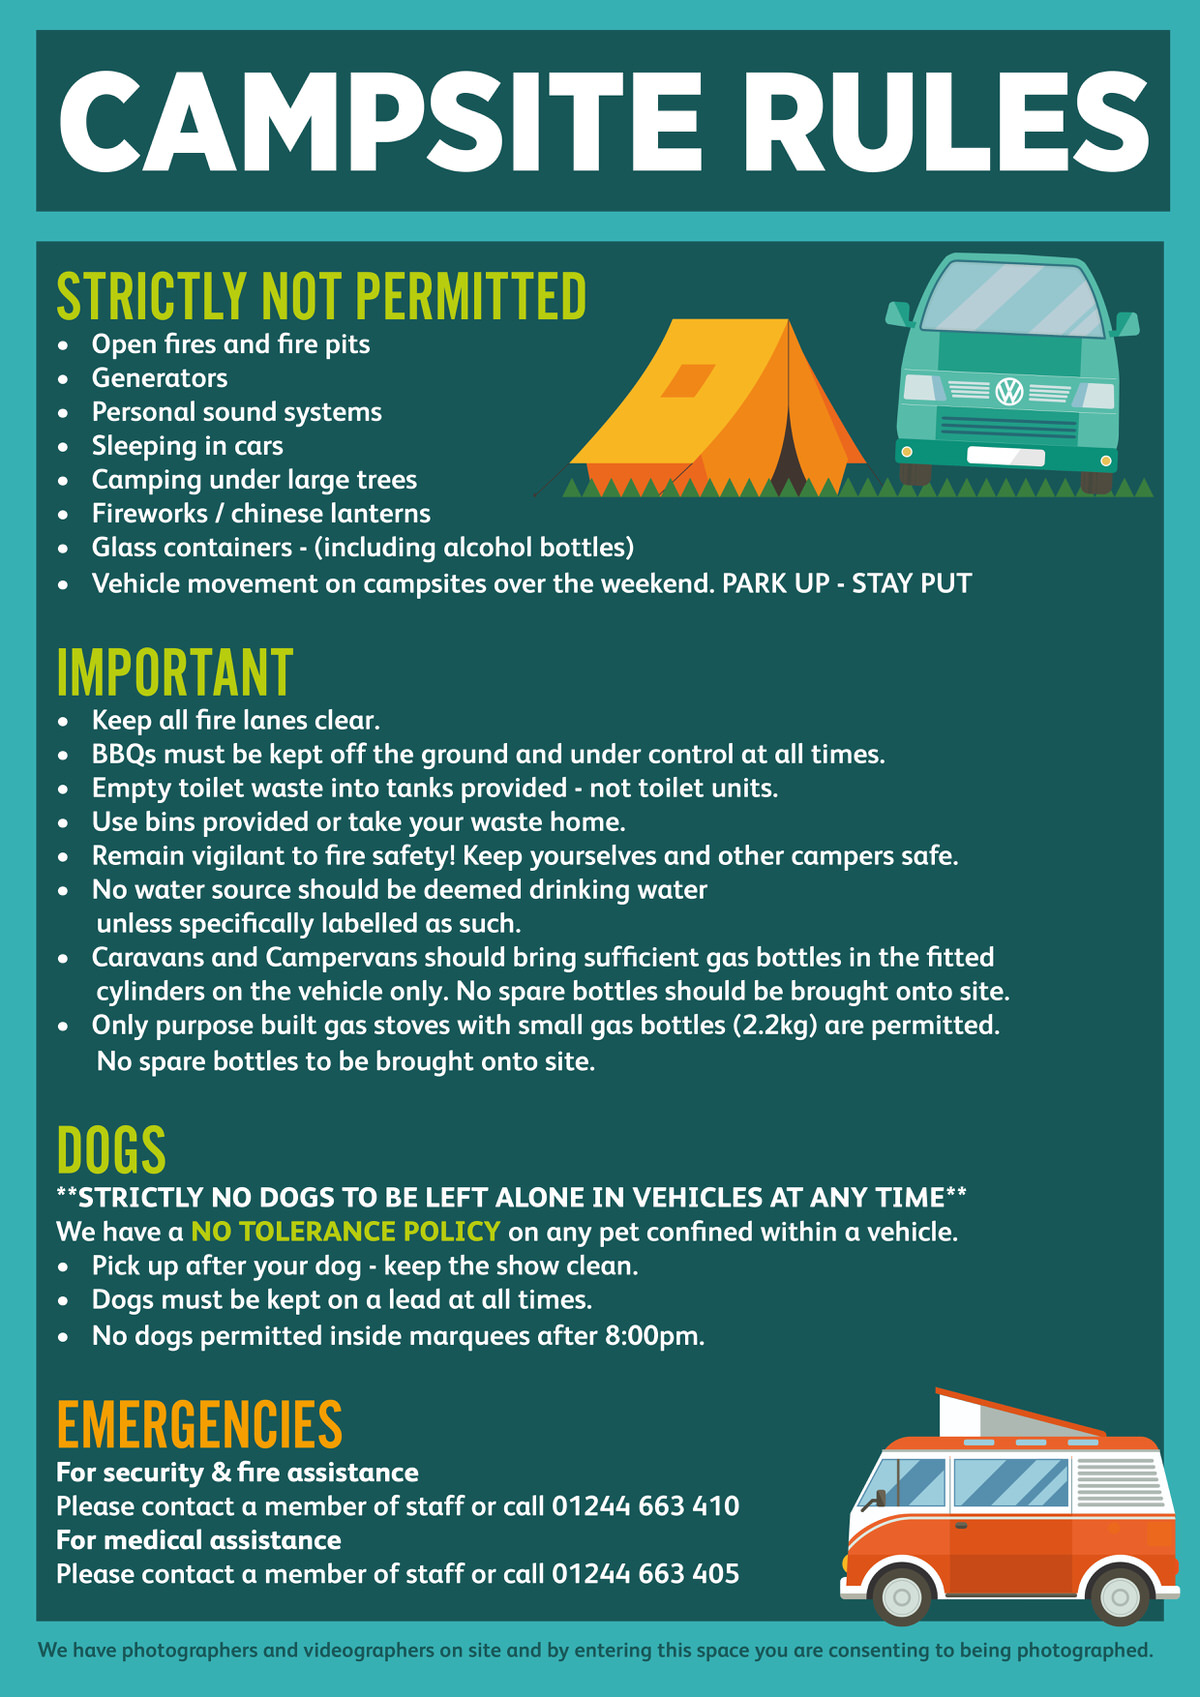 Camp rules. Camping Rules. Campsite Rules правила. Campsite Rules 10 правил. Campsite Rules на английском.